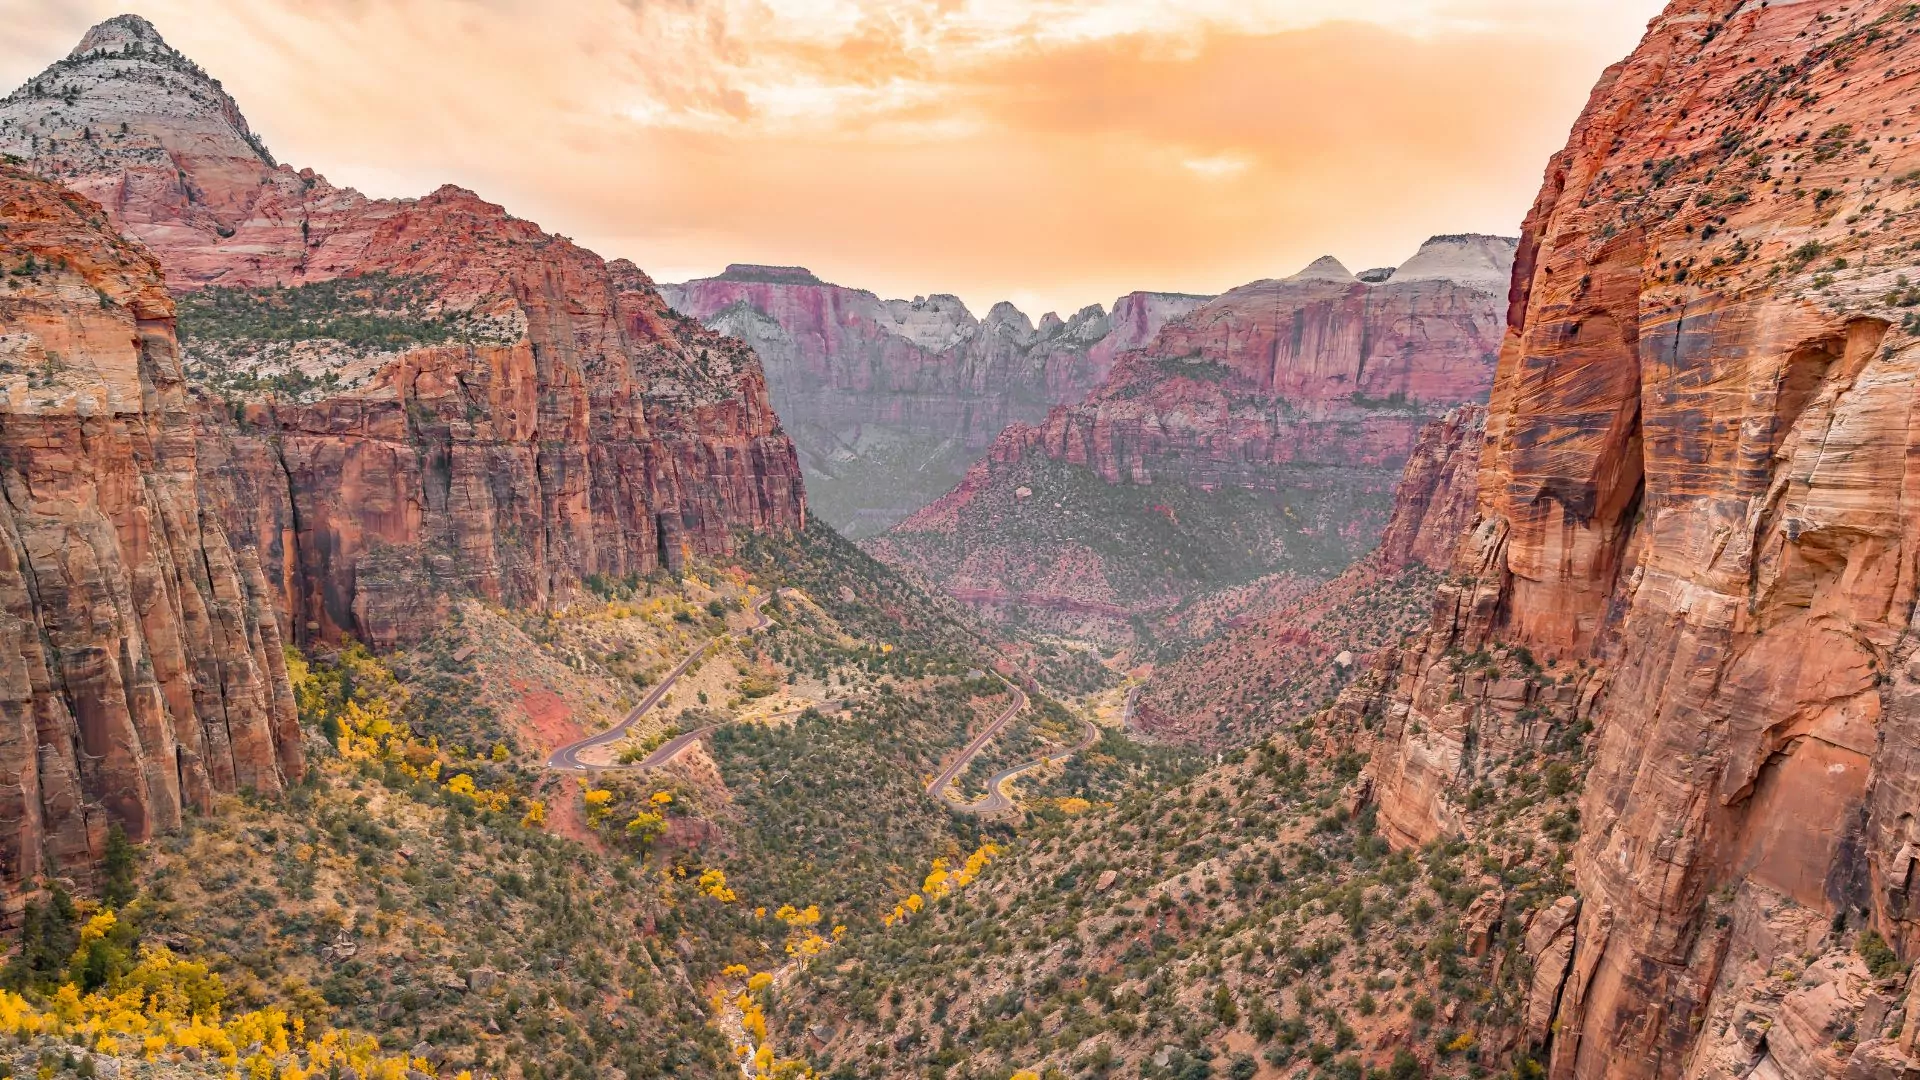 Zion National Park lies before you with towering red rock canyon walls on either side and a winding road leading down the the river running through it